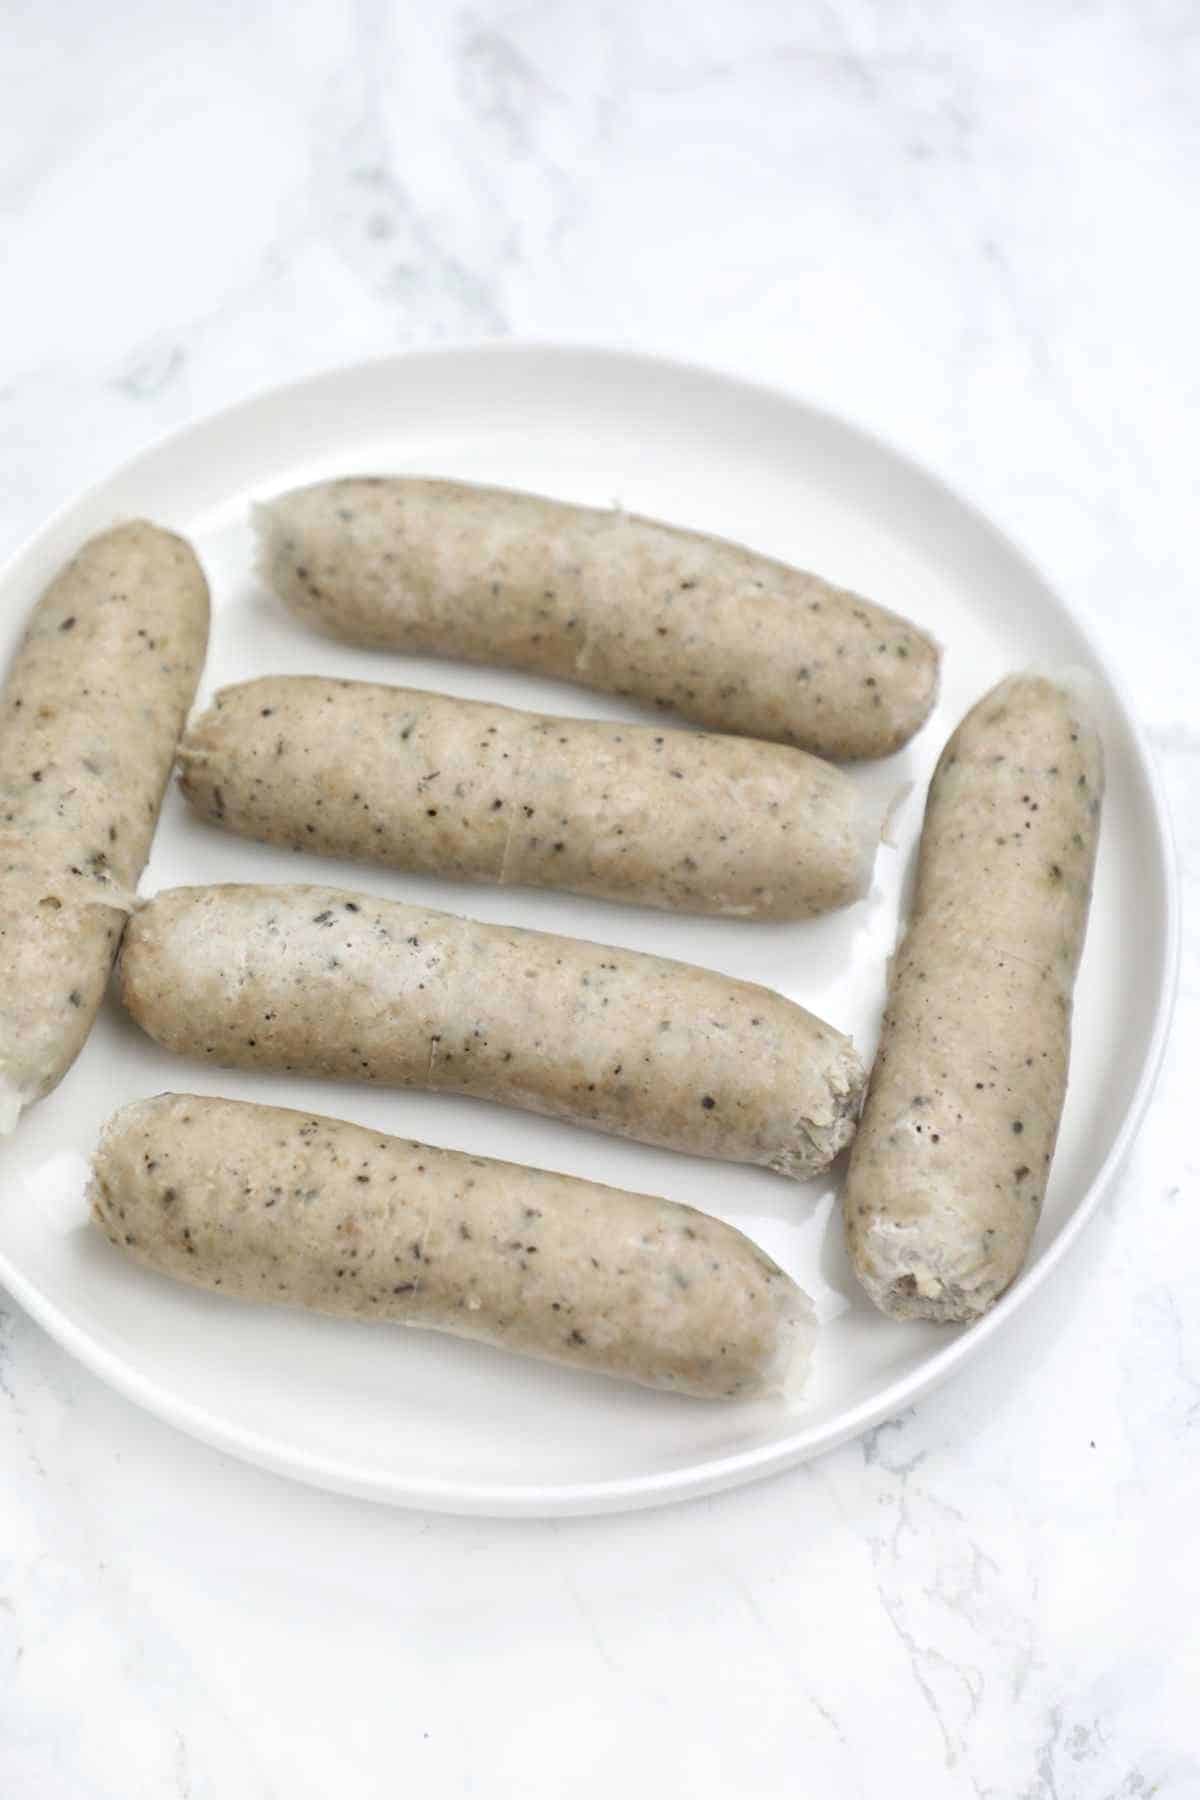 6 boiled sausages on a plate.